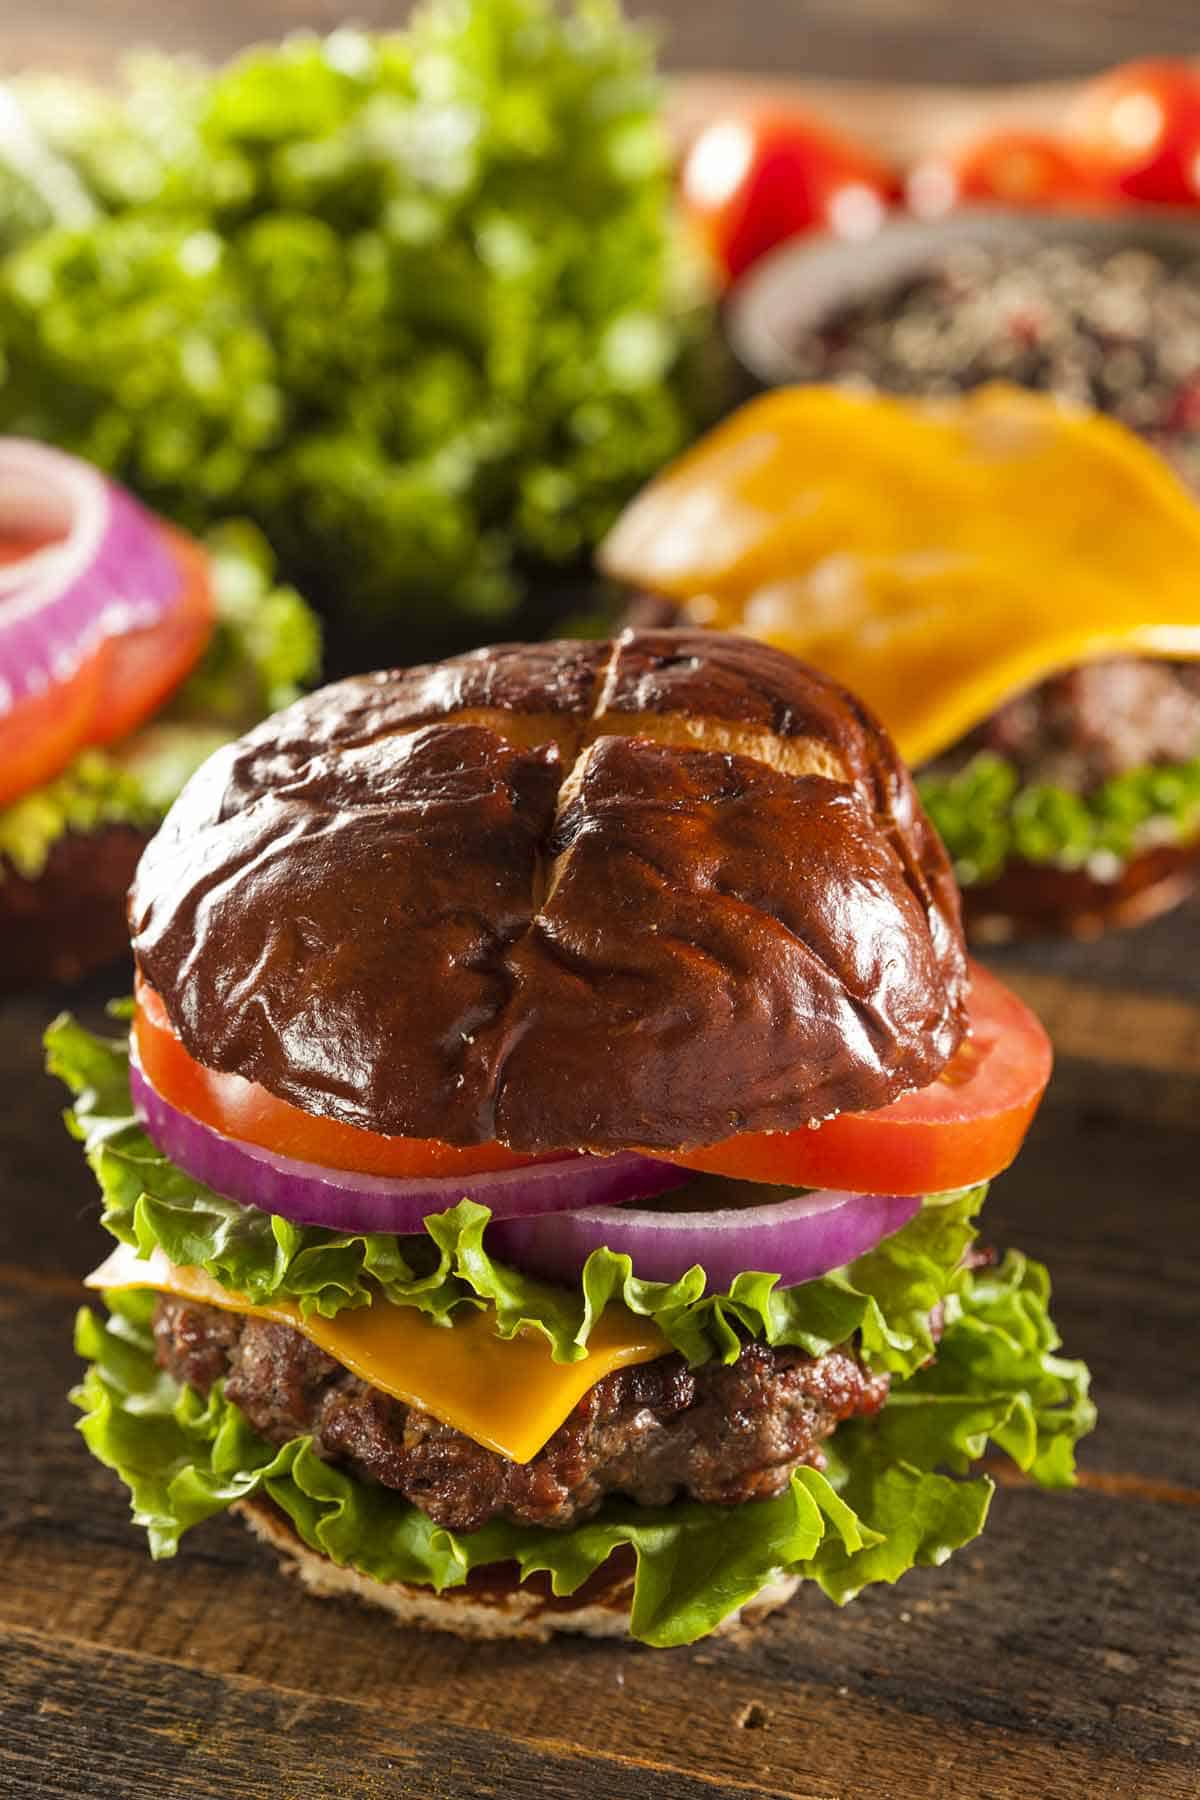 Burger with cheese, lettuce, tomato, and red onions served on a pretzel bun.